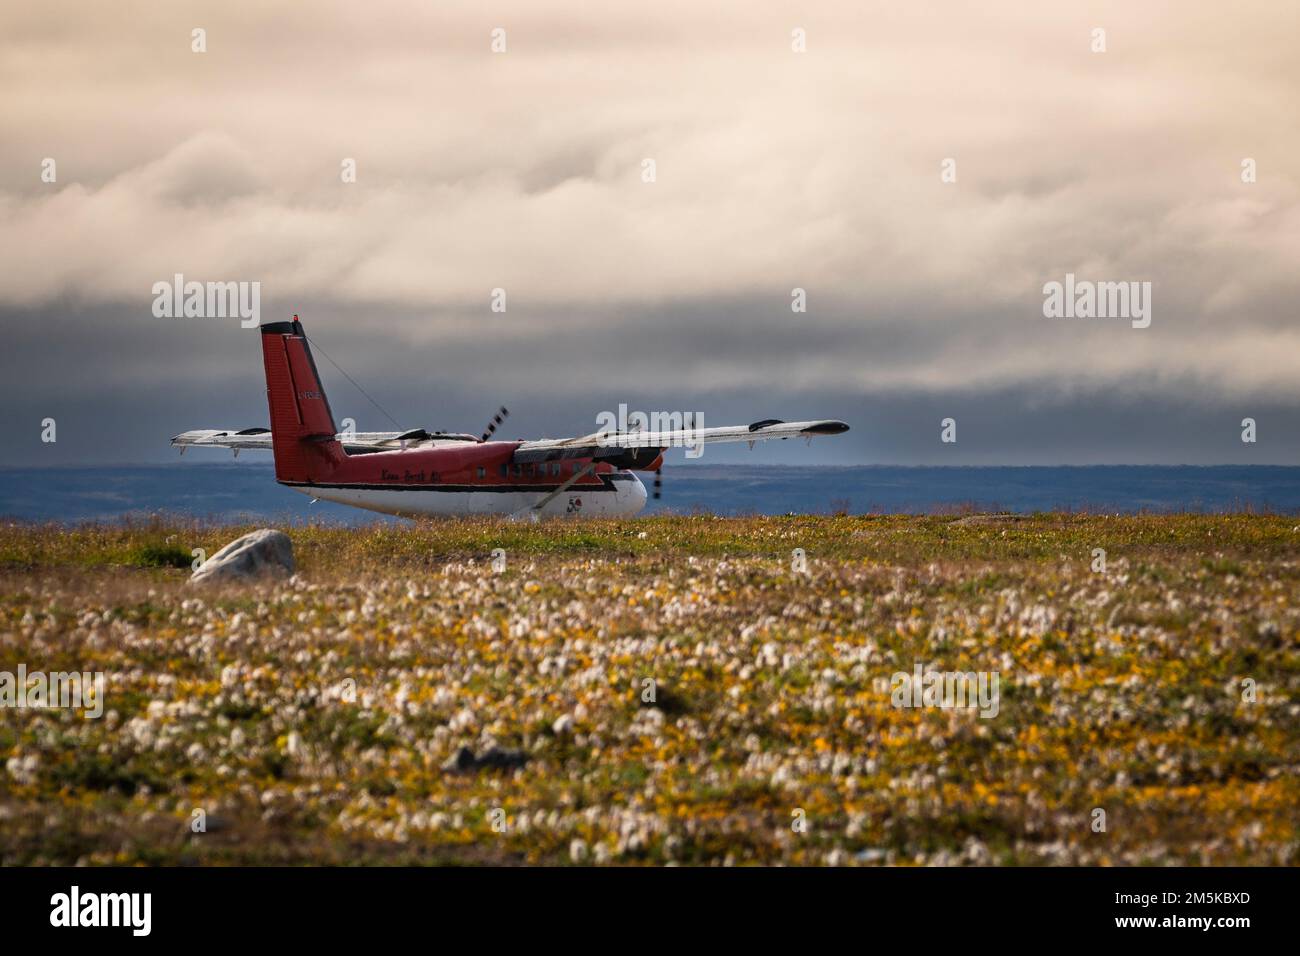 DHC6 Twin Otter of Kenn Borek Air taking off from a dirt airstrip in Pond Inlet on Baffin Island in Nunavut, Northern Canada. Stock Photo